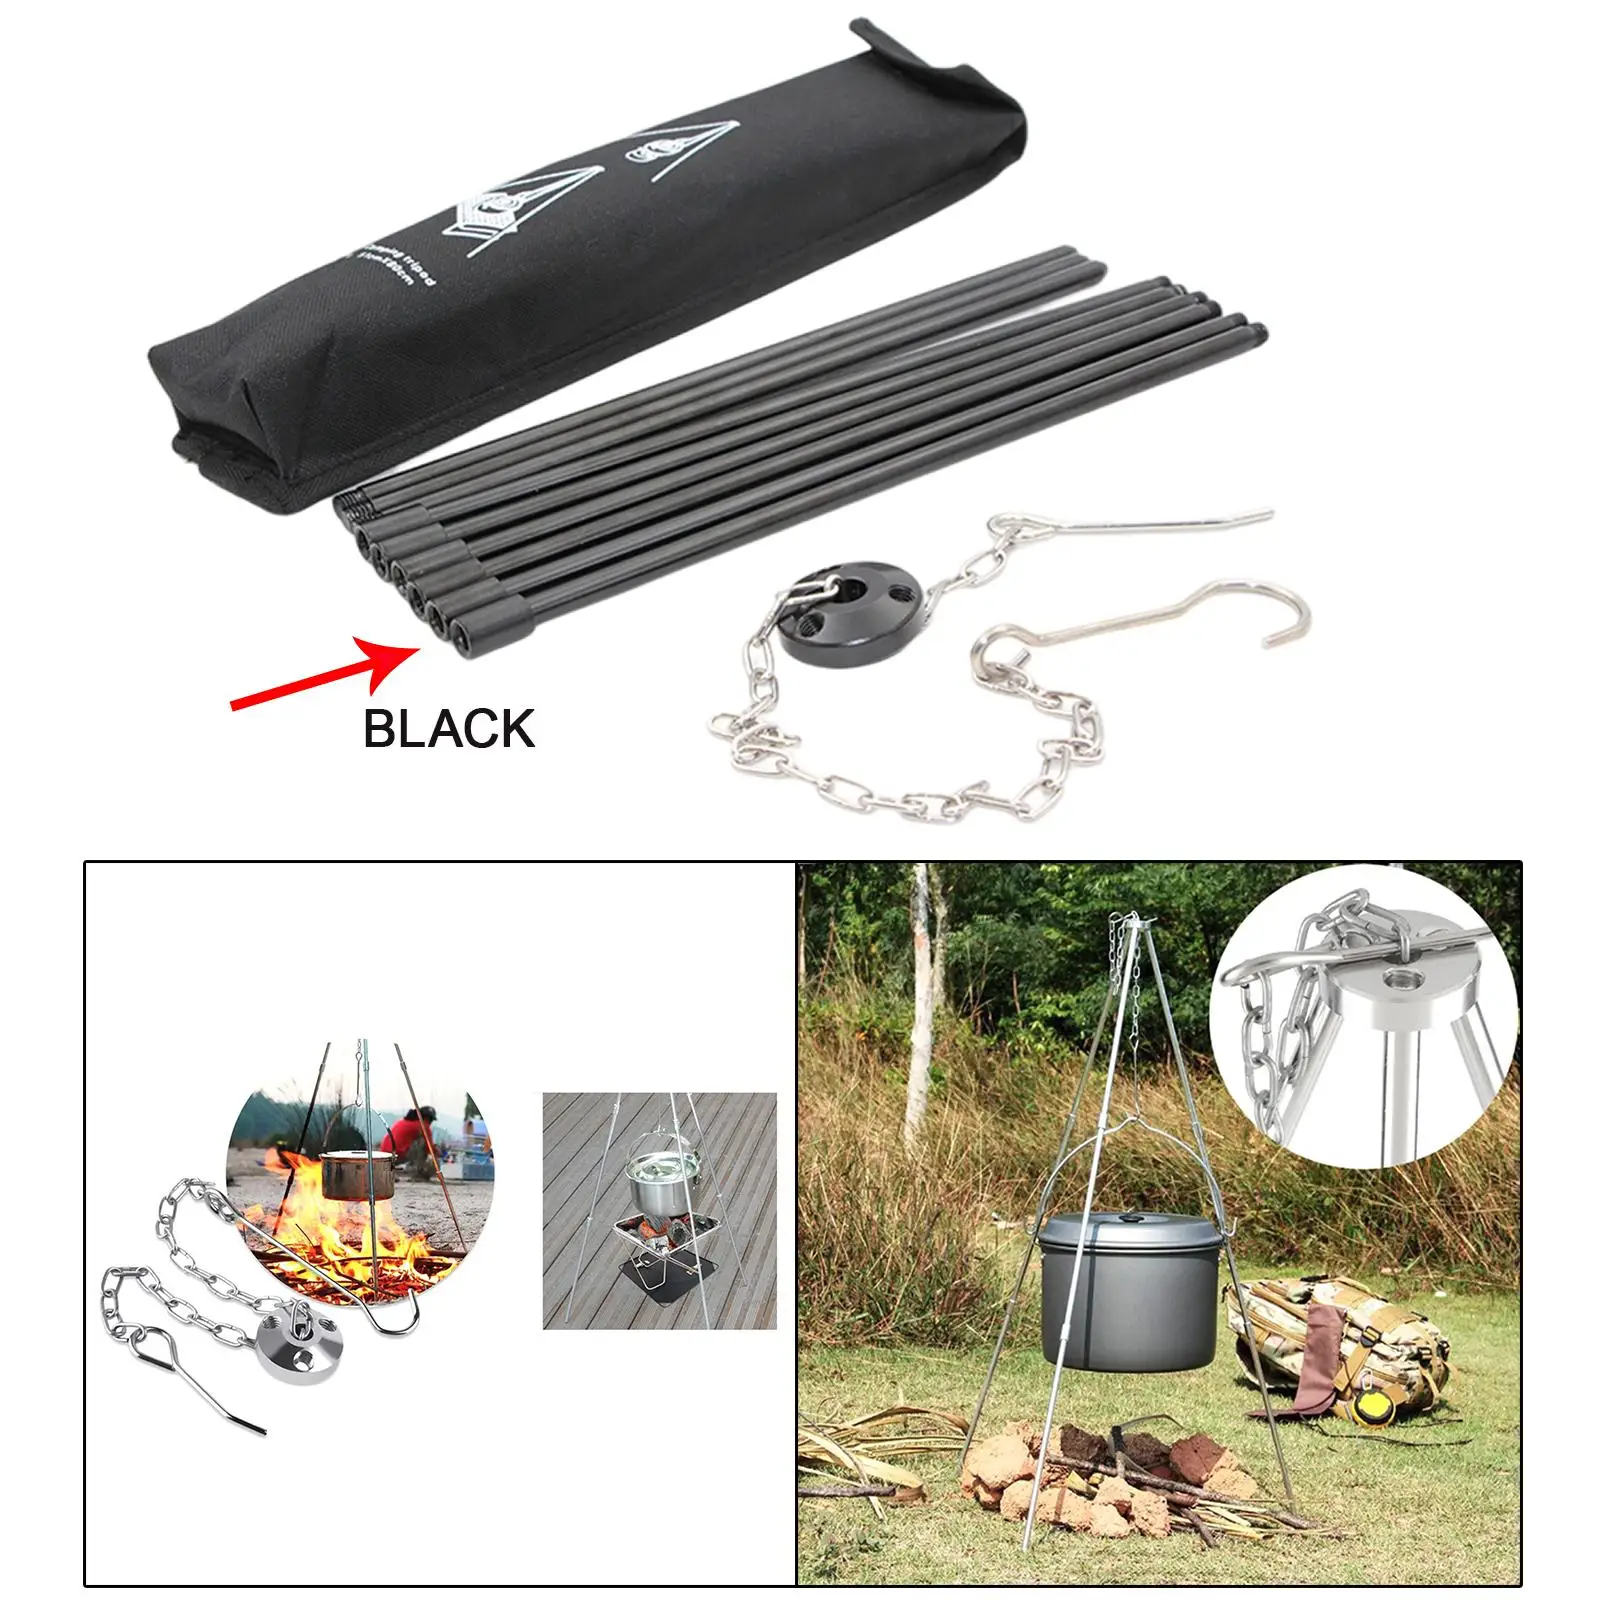 Portable Camping Tripod with Storage Bag Adjustable Cooking Pot Grill for BBQ